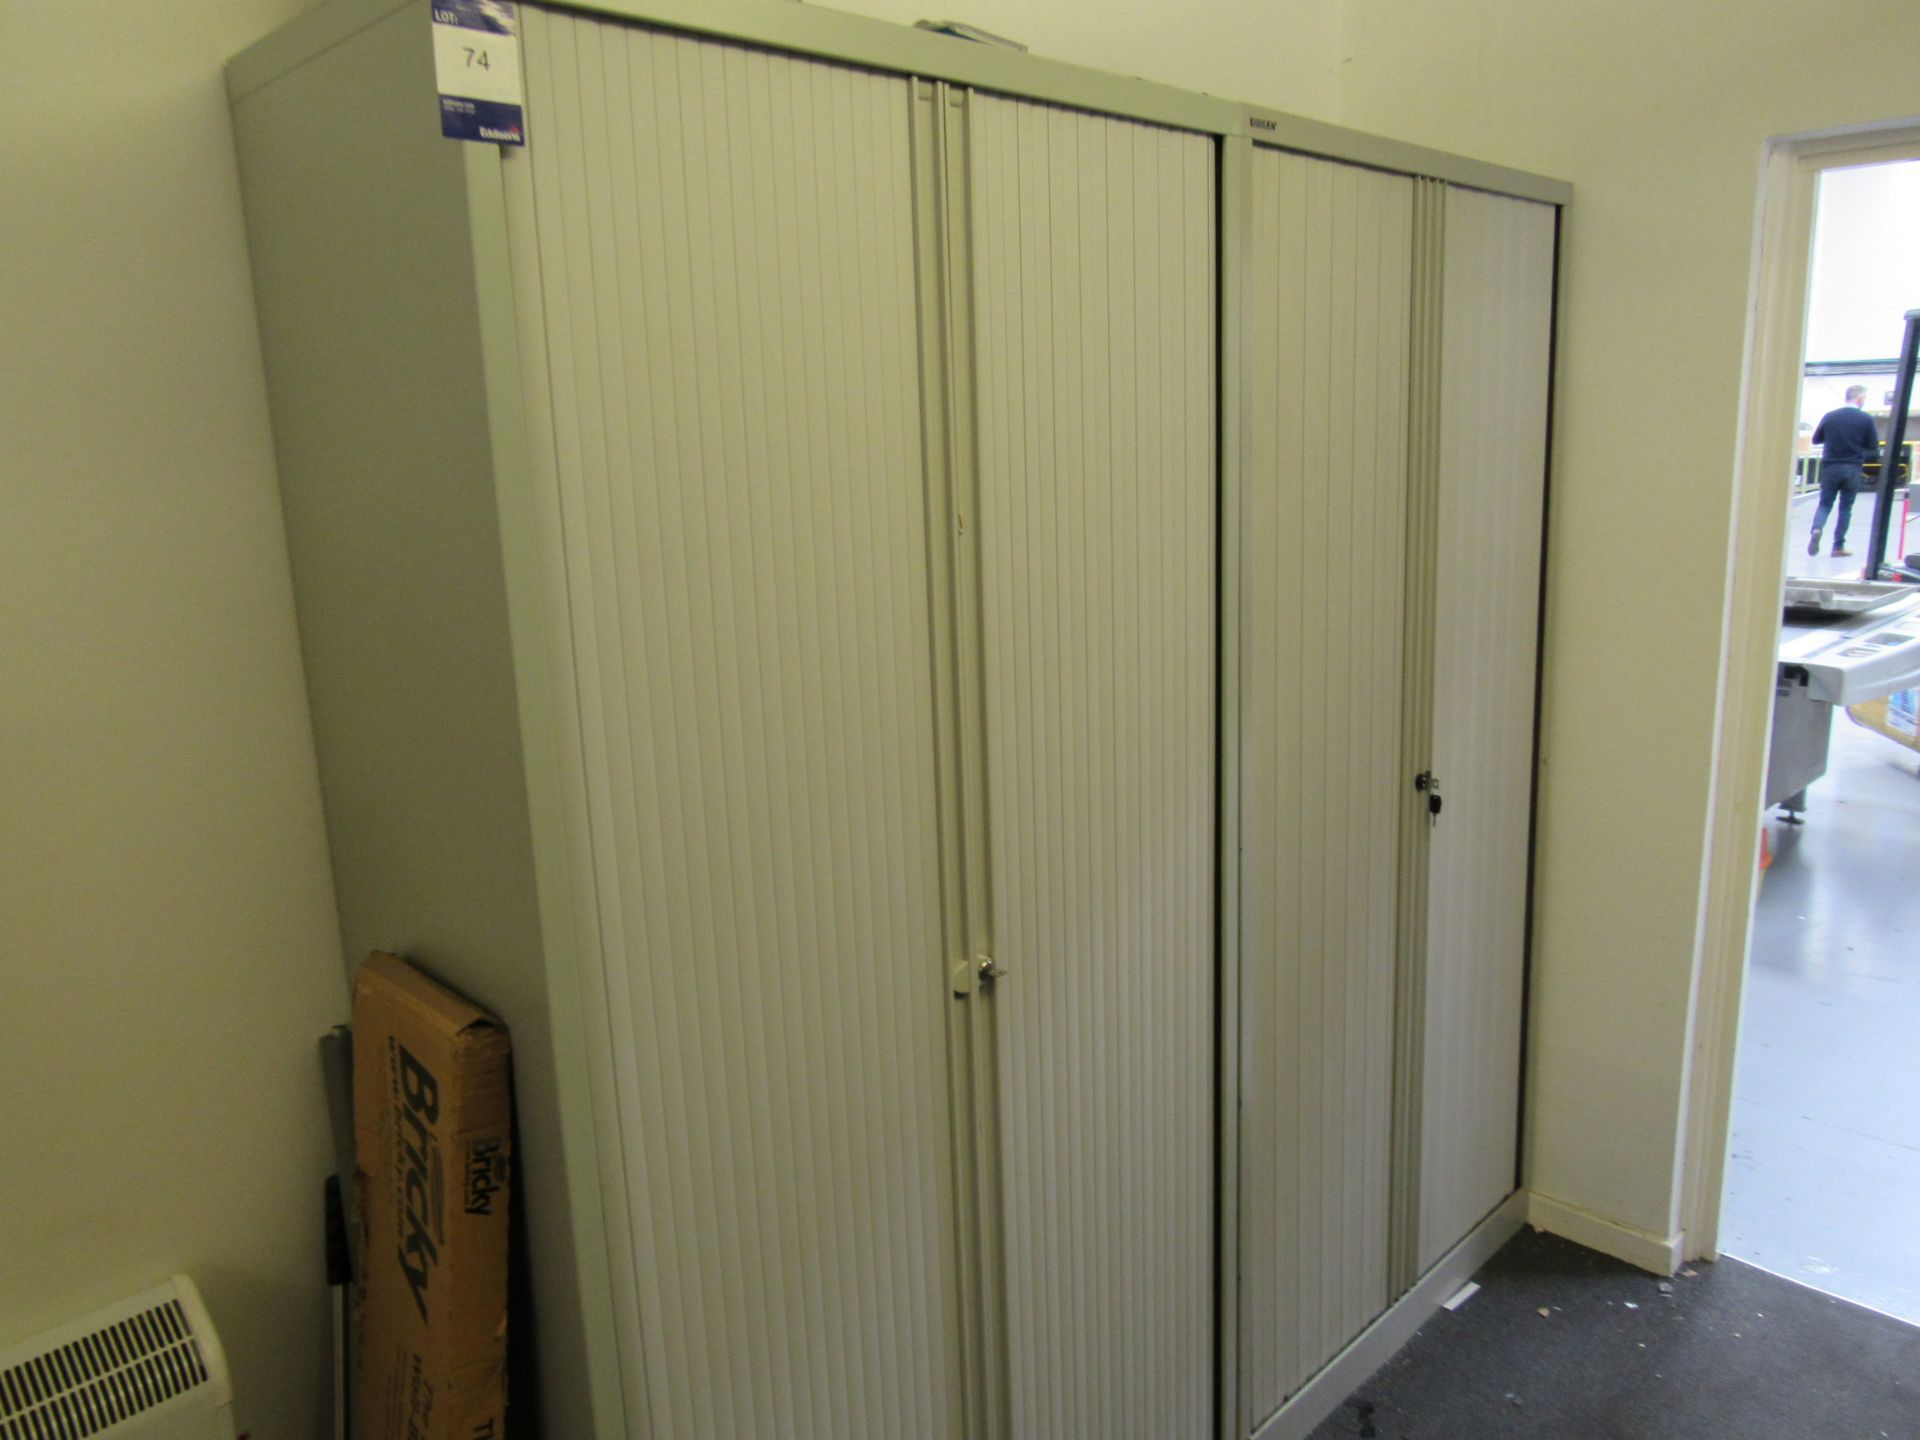 2 x Bisley tambour fronted cabinets (Approximately - Image 2 of 2